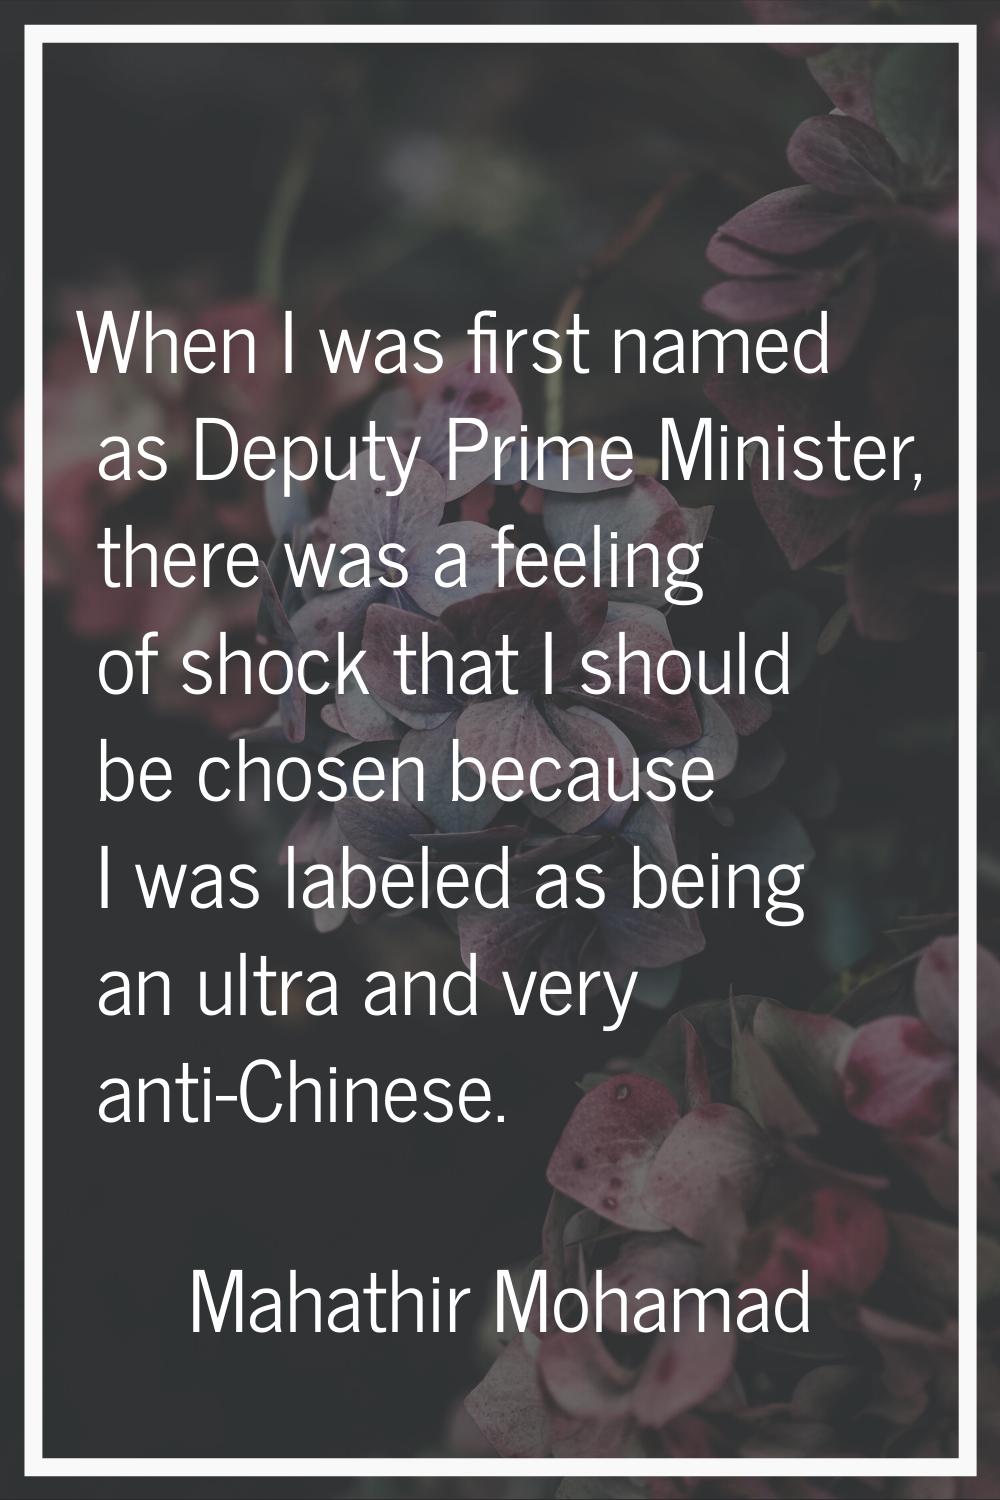 When I was first named as Deputy Prime Minister, there was a feeling of shock that I should be chos